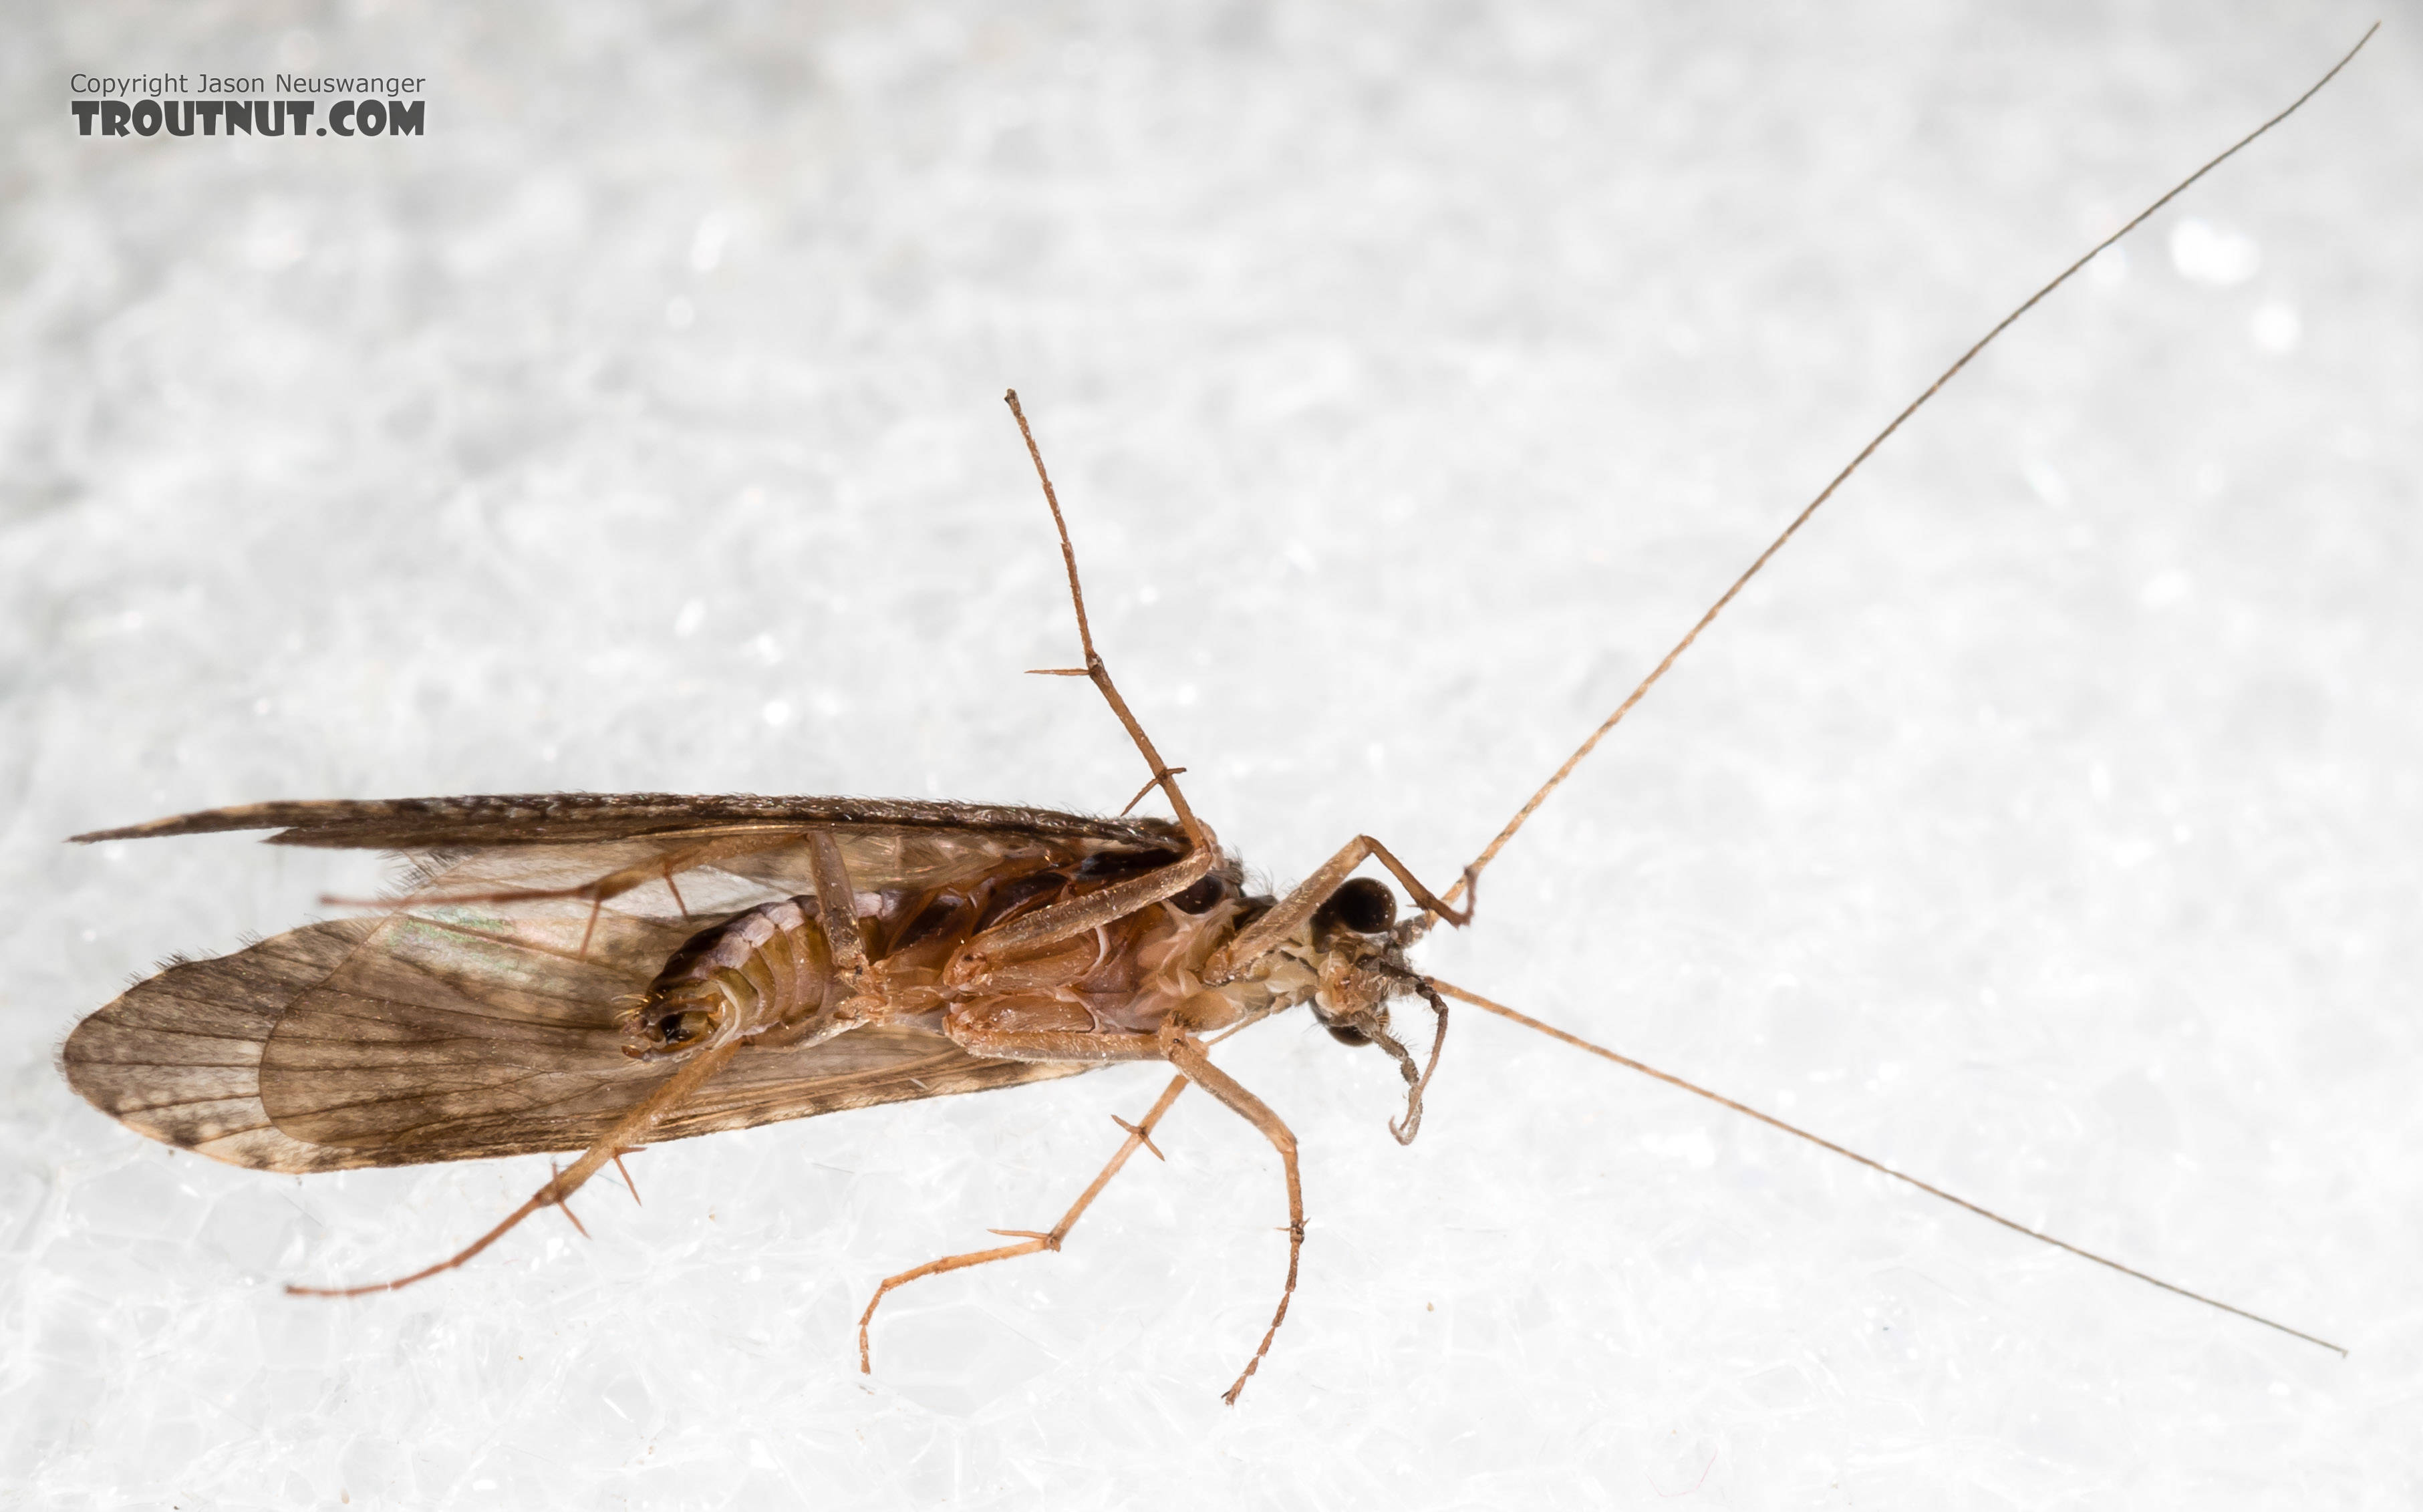 Male Hydropsyche (Spotted Sedges) Caddisfly Adult from the Henry's Fork of the Snake River in Idaho